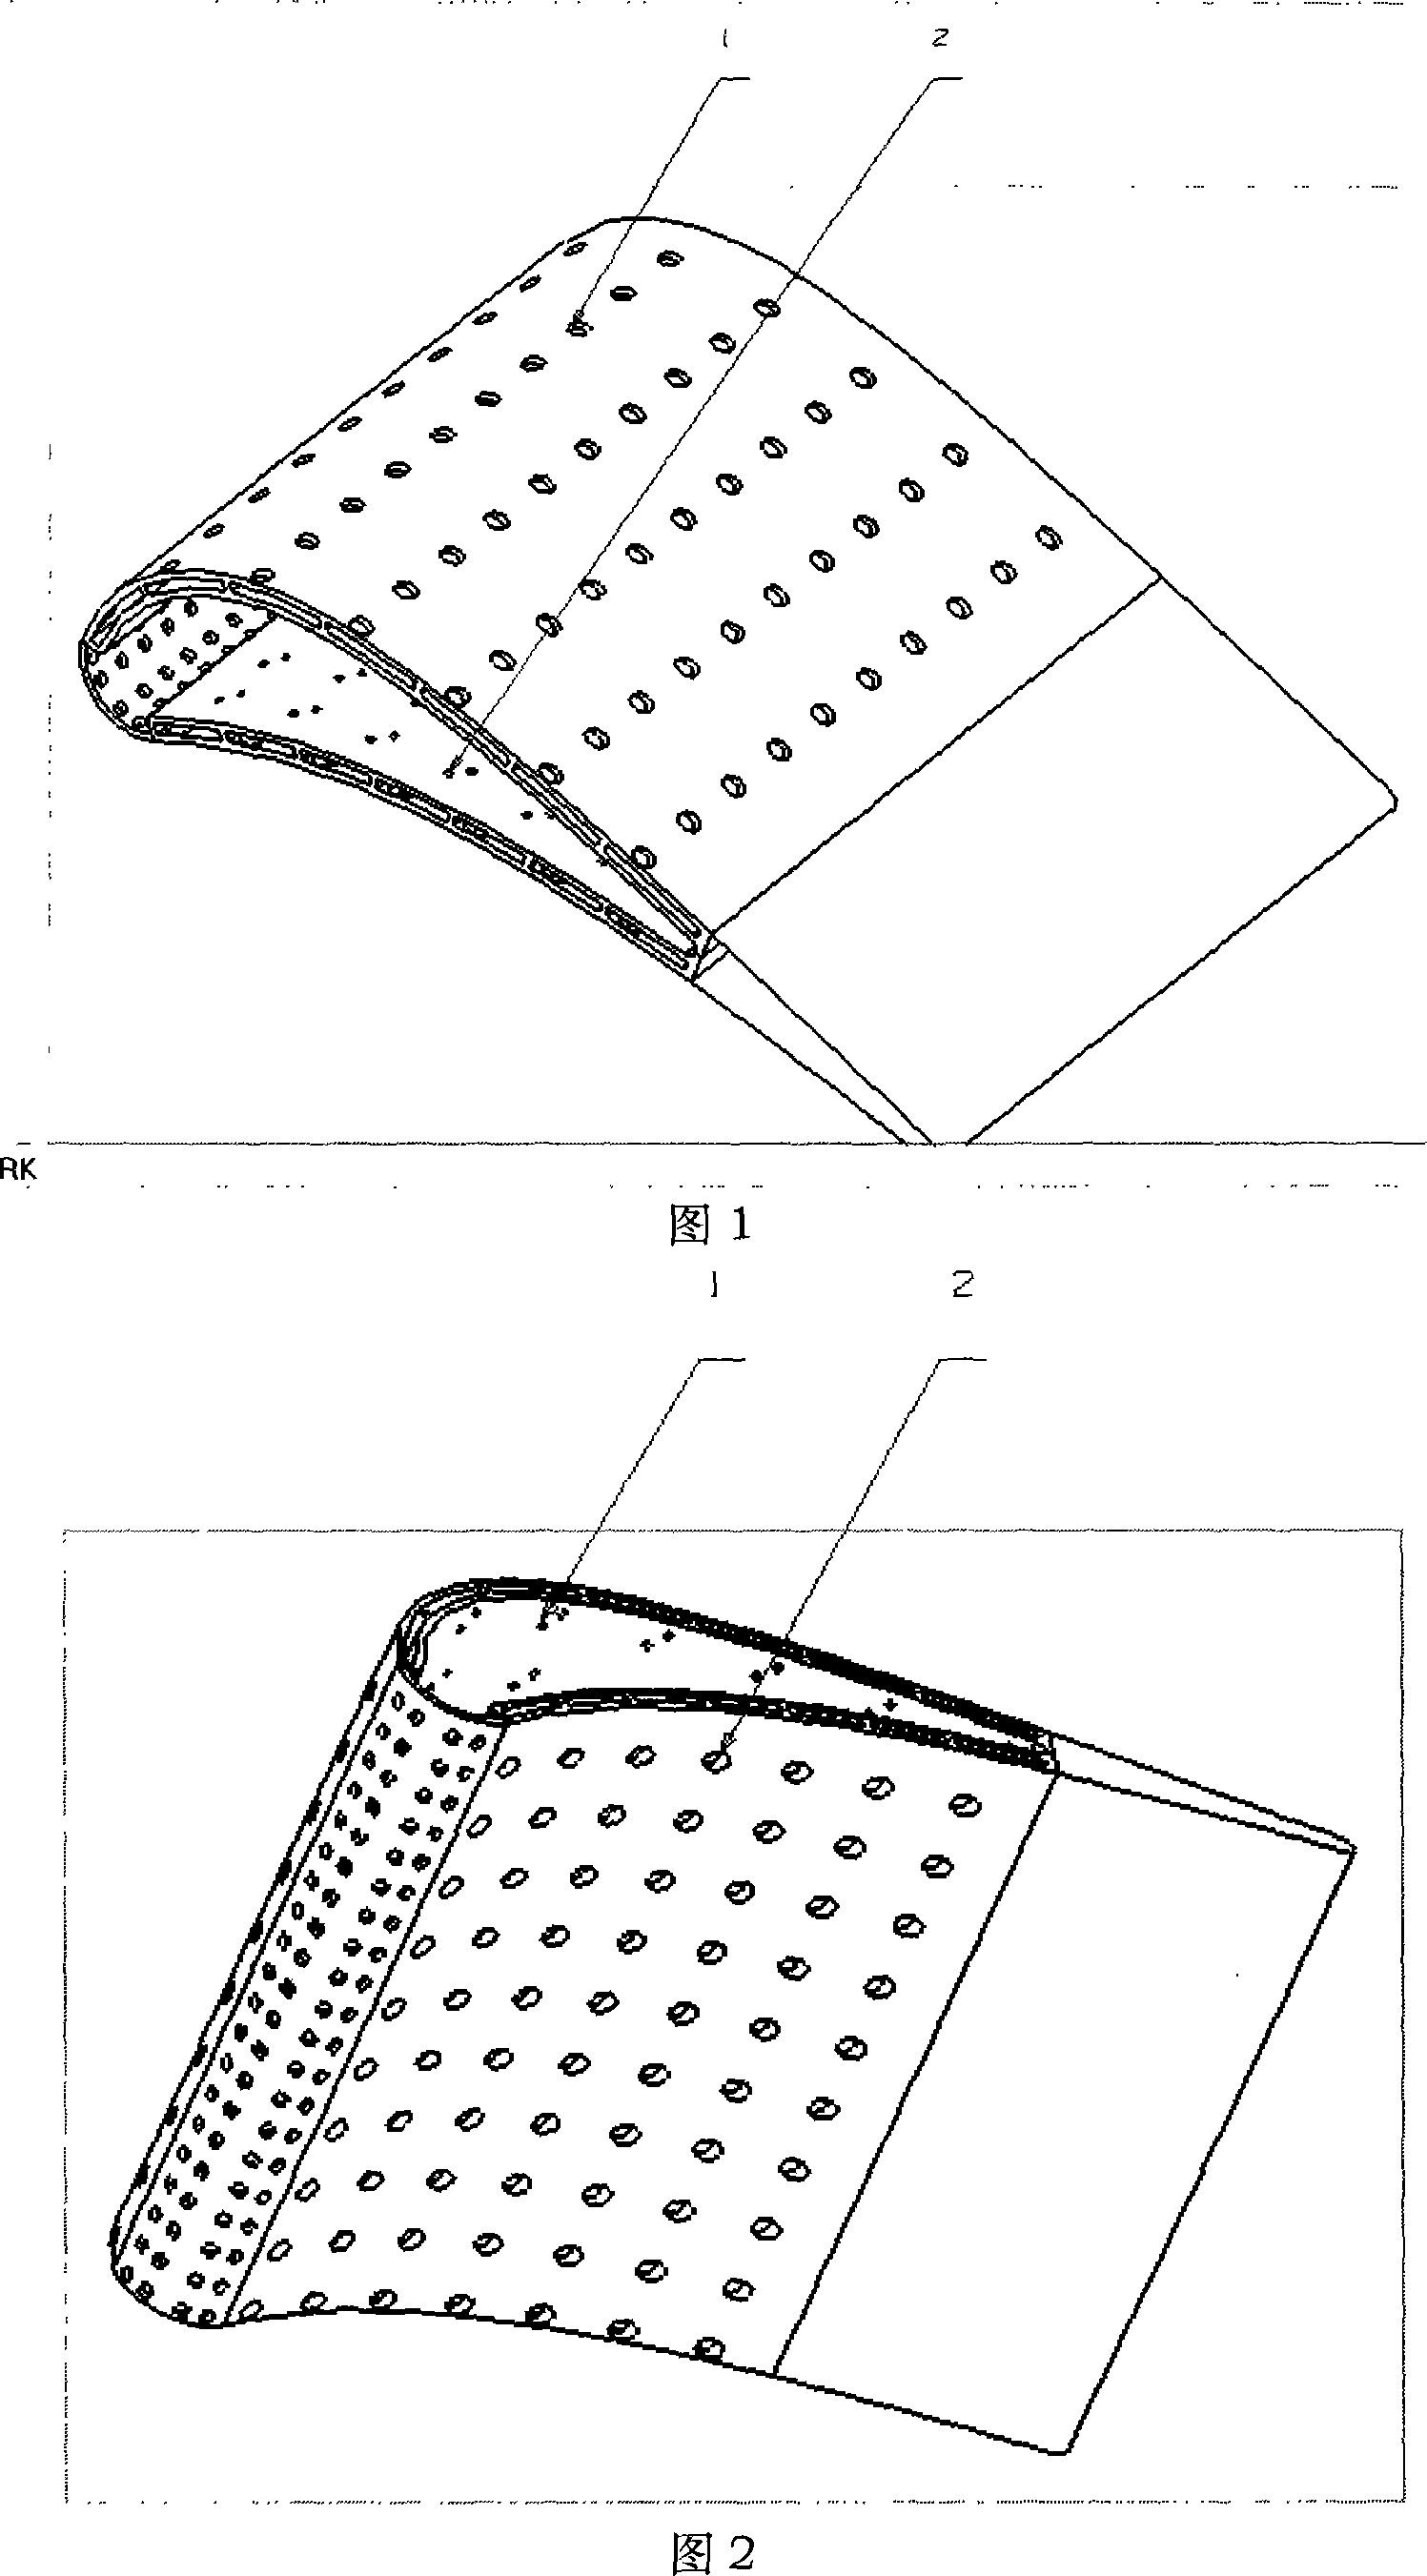 Combined cooling structure for turbine blade middle-part porous impact aerating film